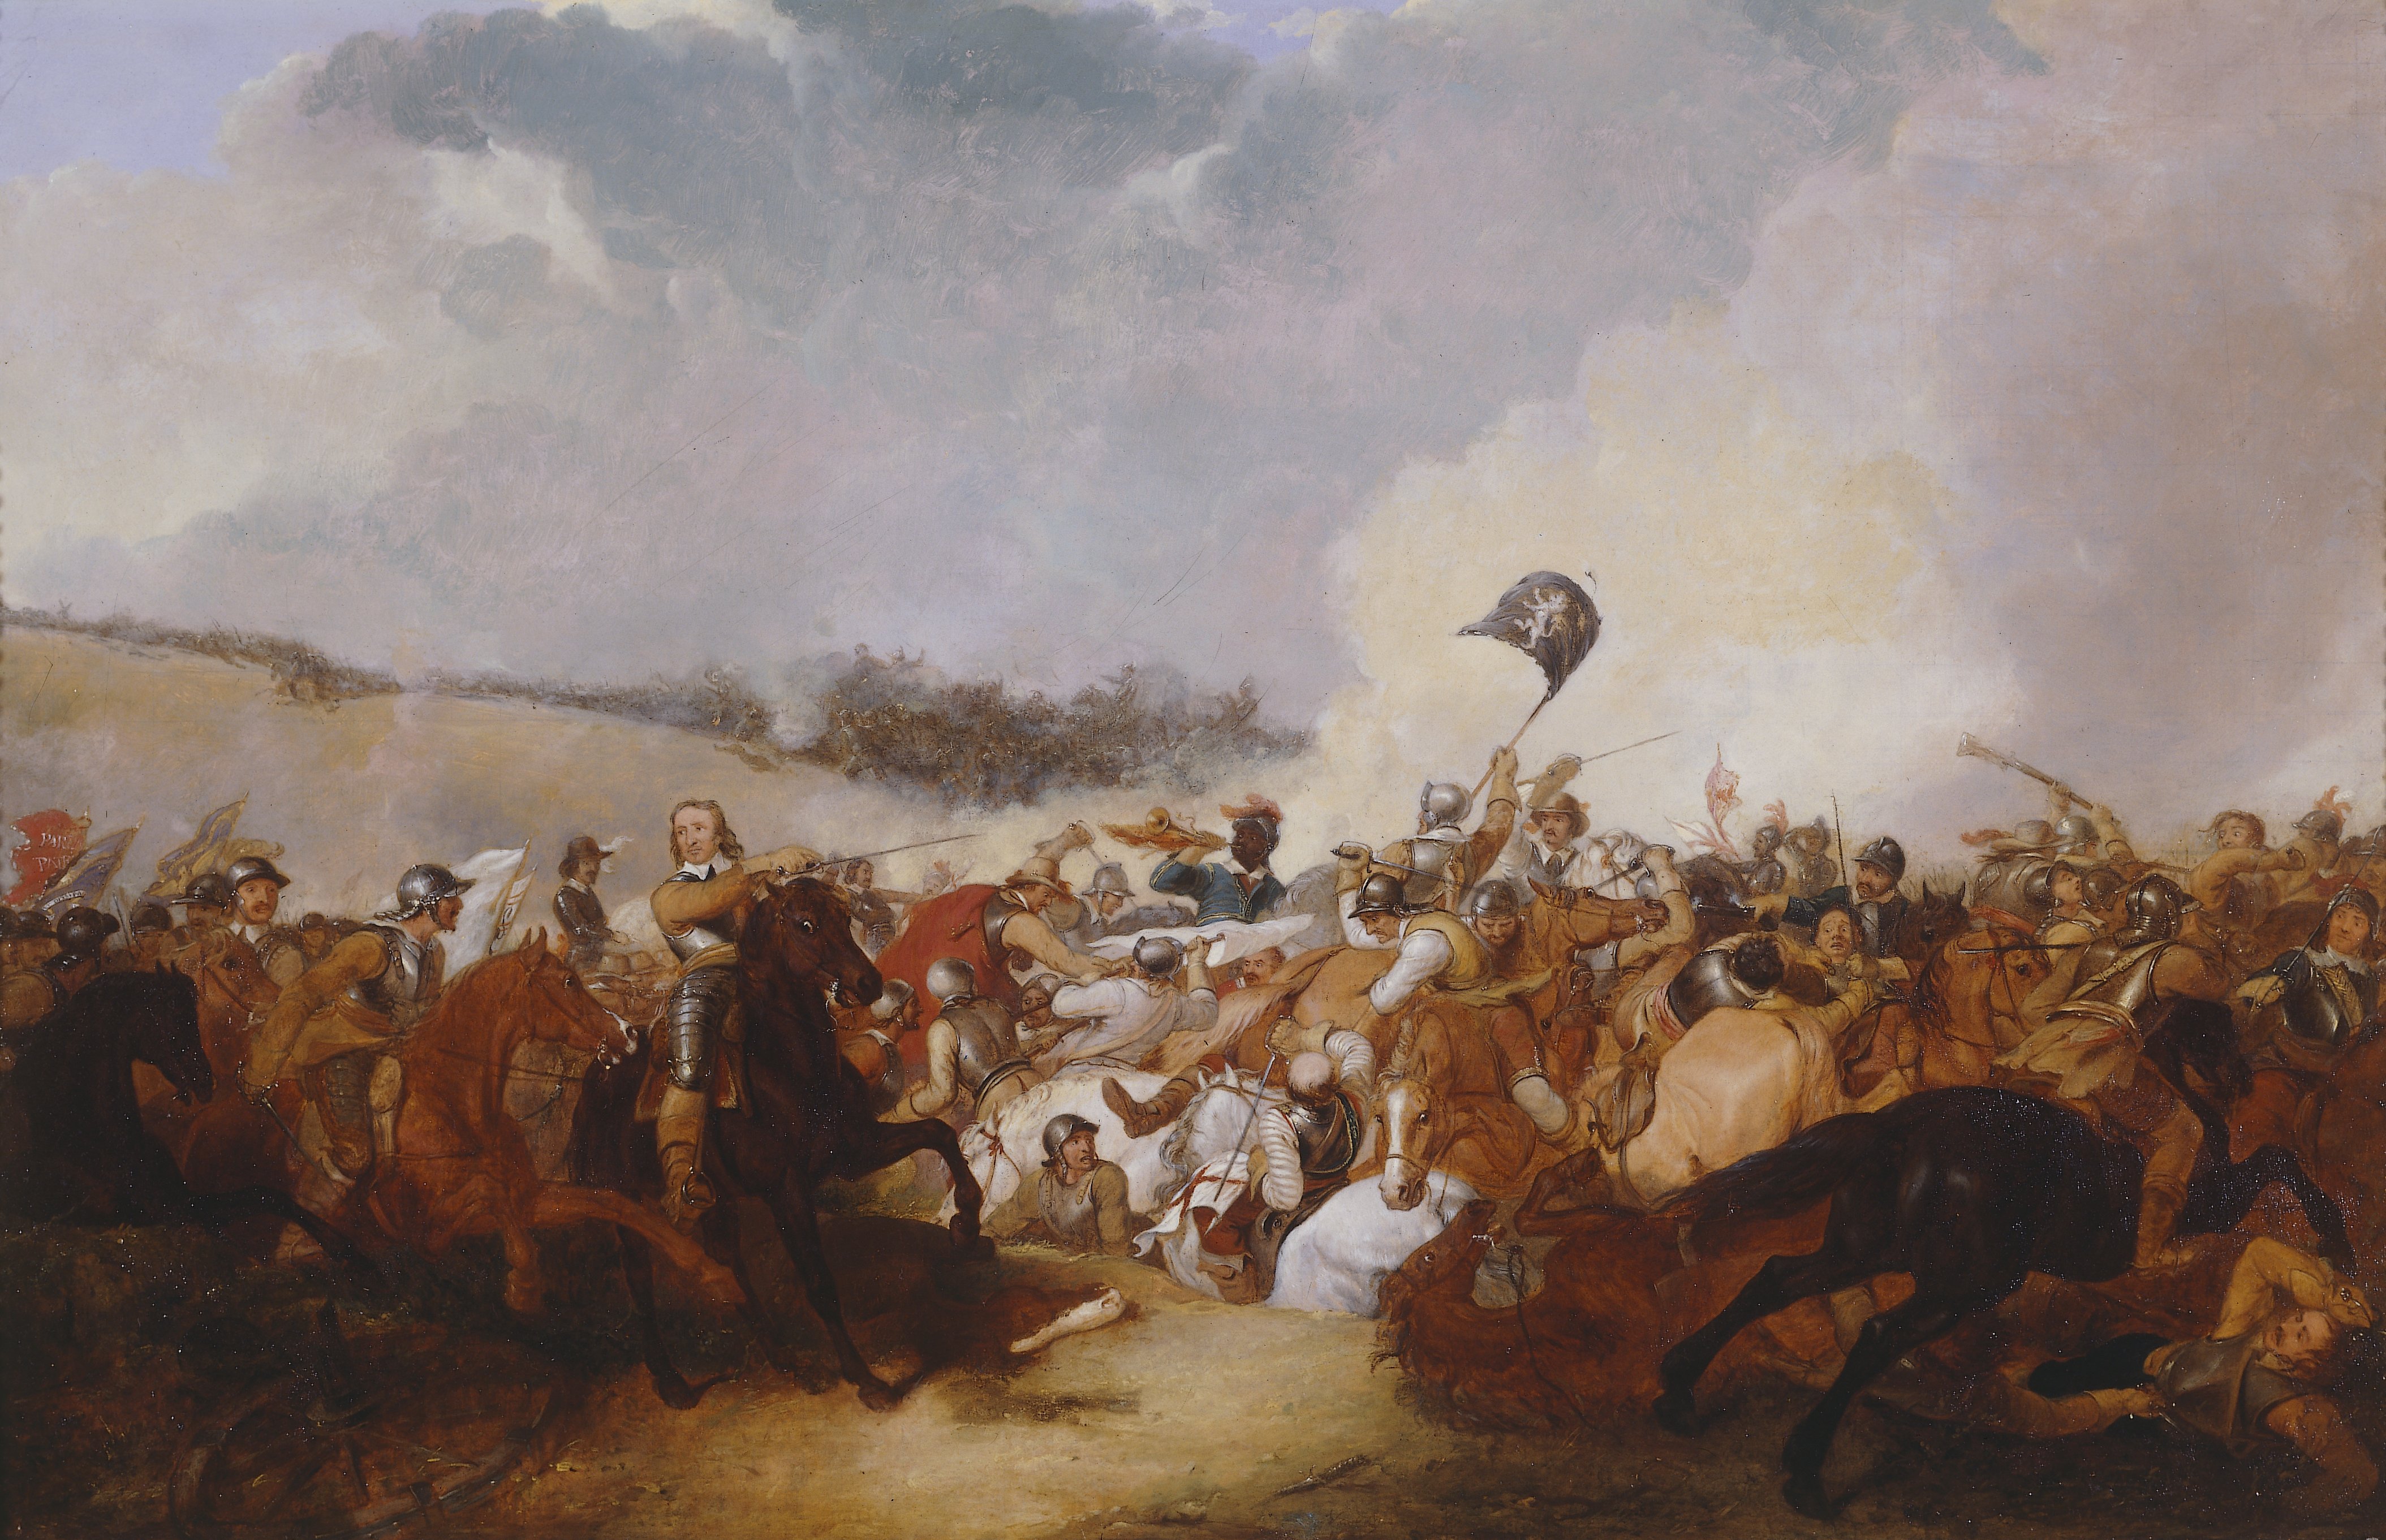 ‘Cromwell leading his Cavalry into Battle’ by Abraham Cooper, c. 1860, Oil on Canvas. thumbnail